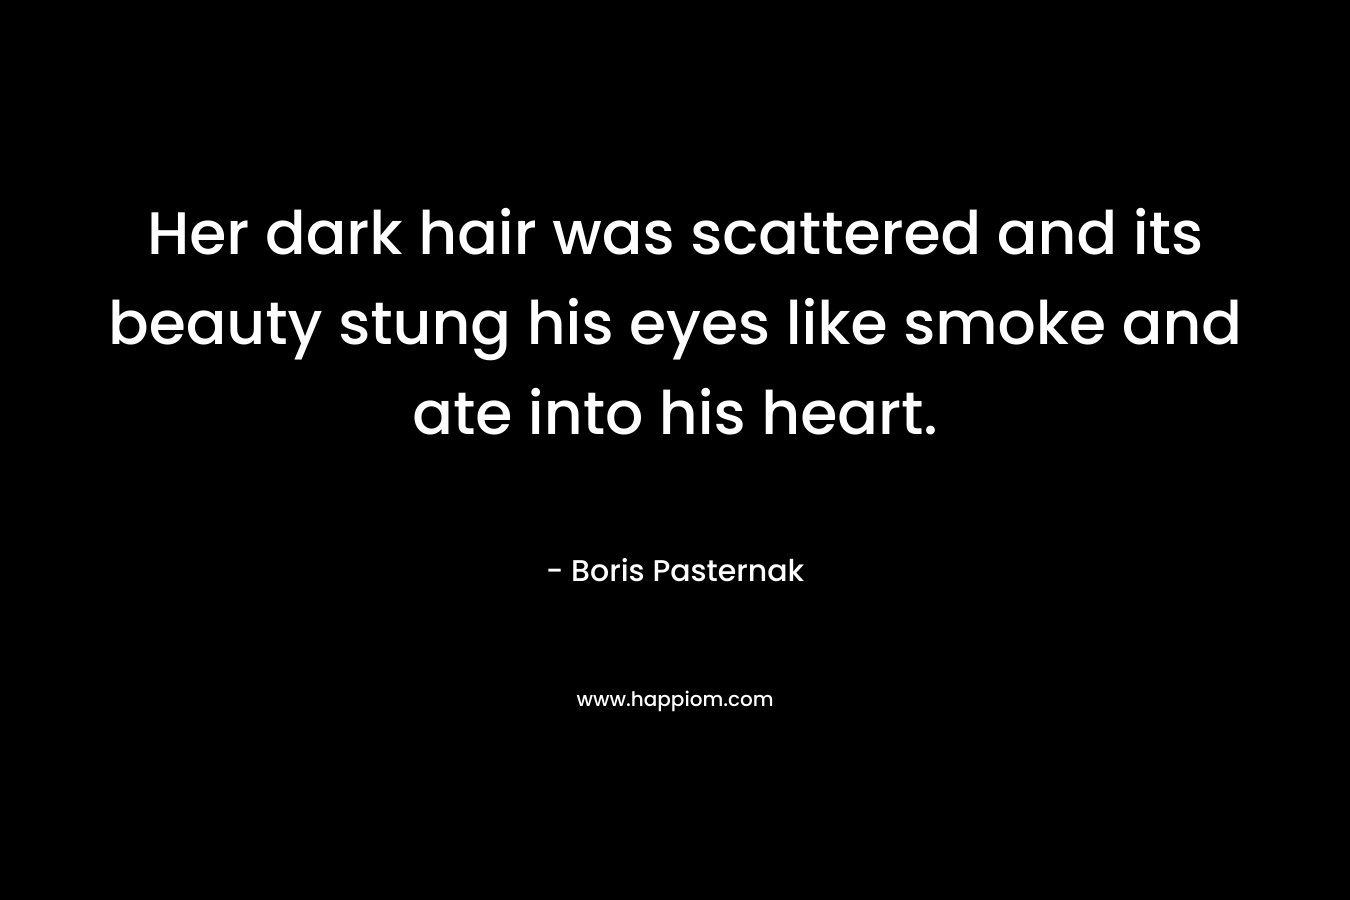 Her dark hair was scattered and its beauty stung his eyes like smoke and ate into his heart.